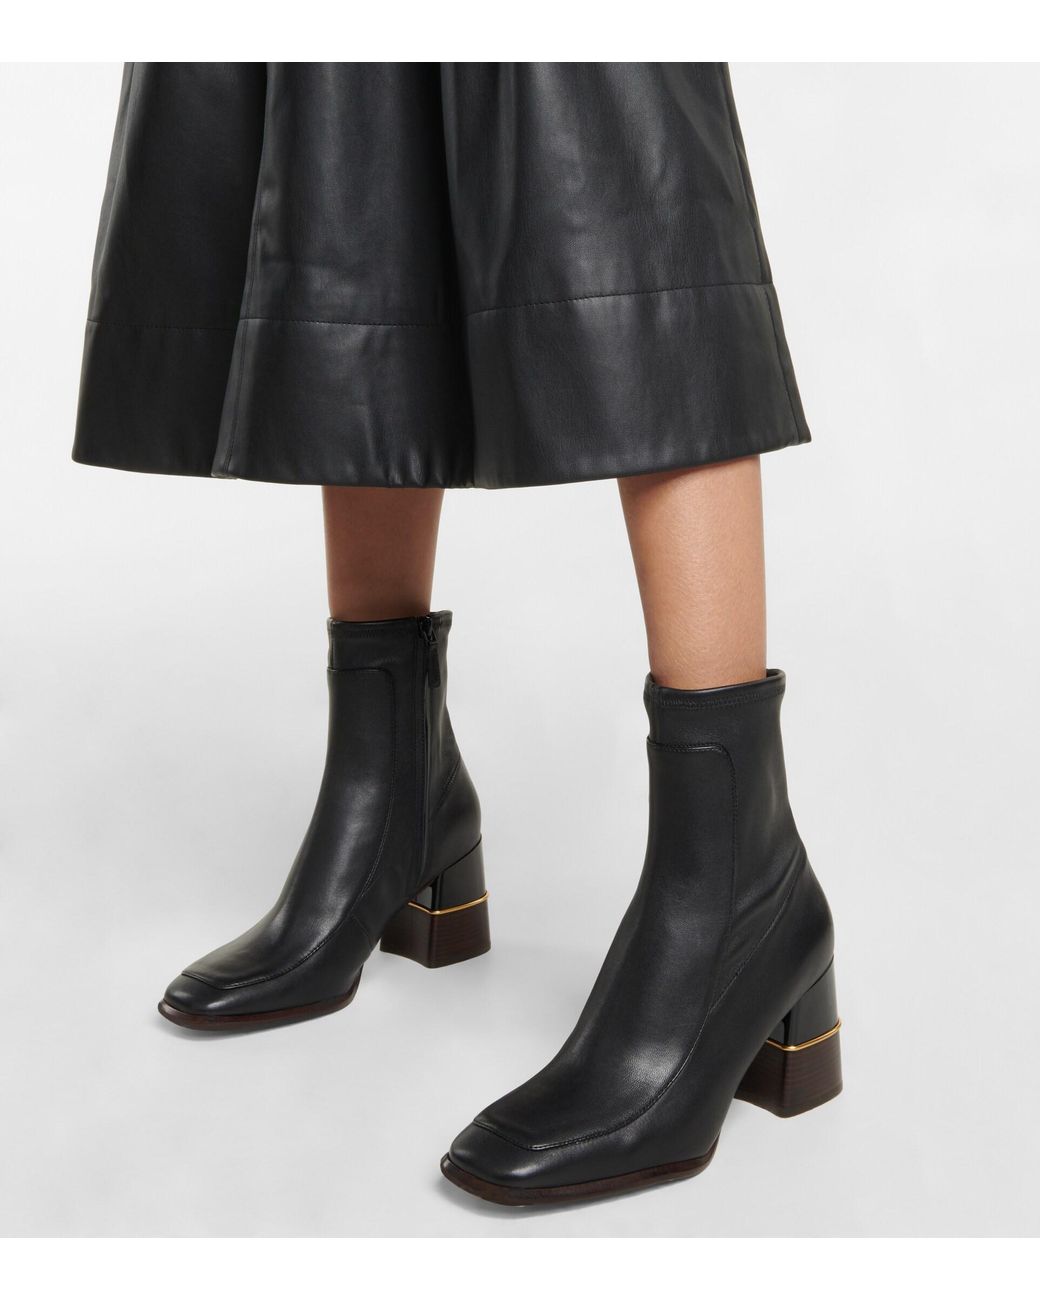 Tory Burch Multi-logo Leather Ankle Boots in Black | Lyst